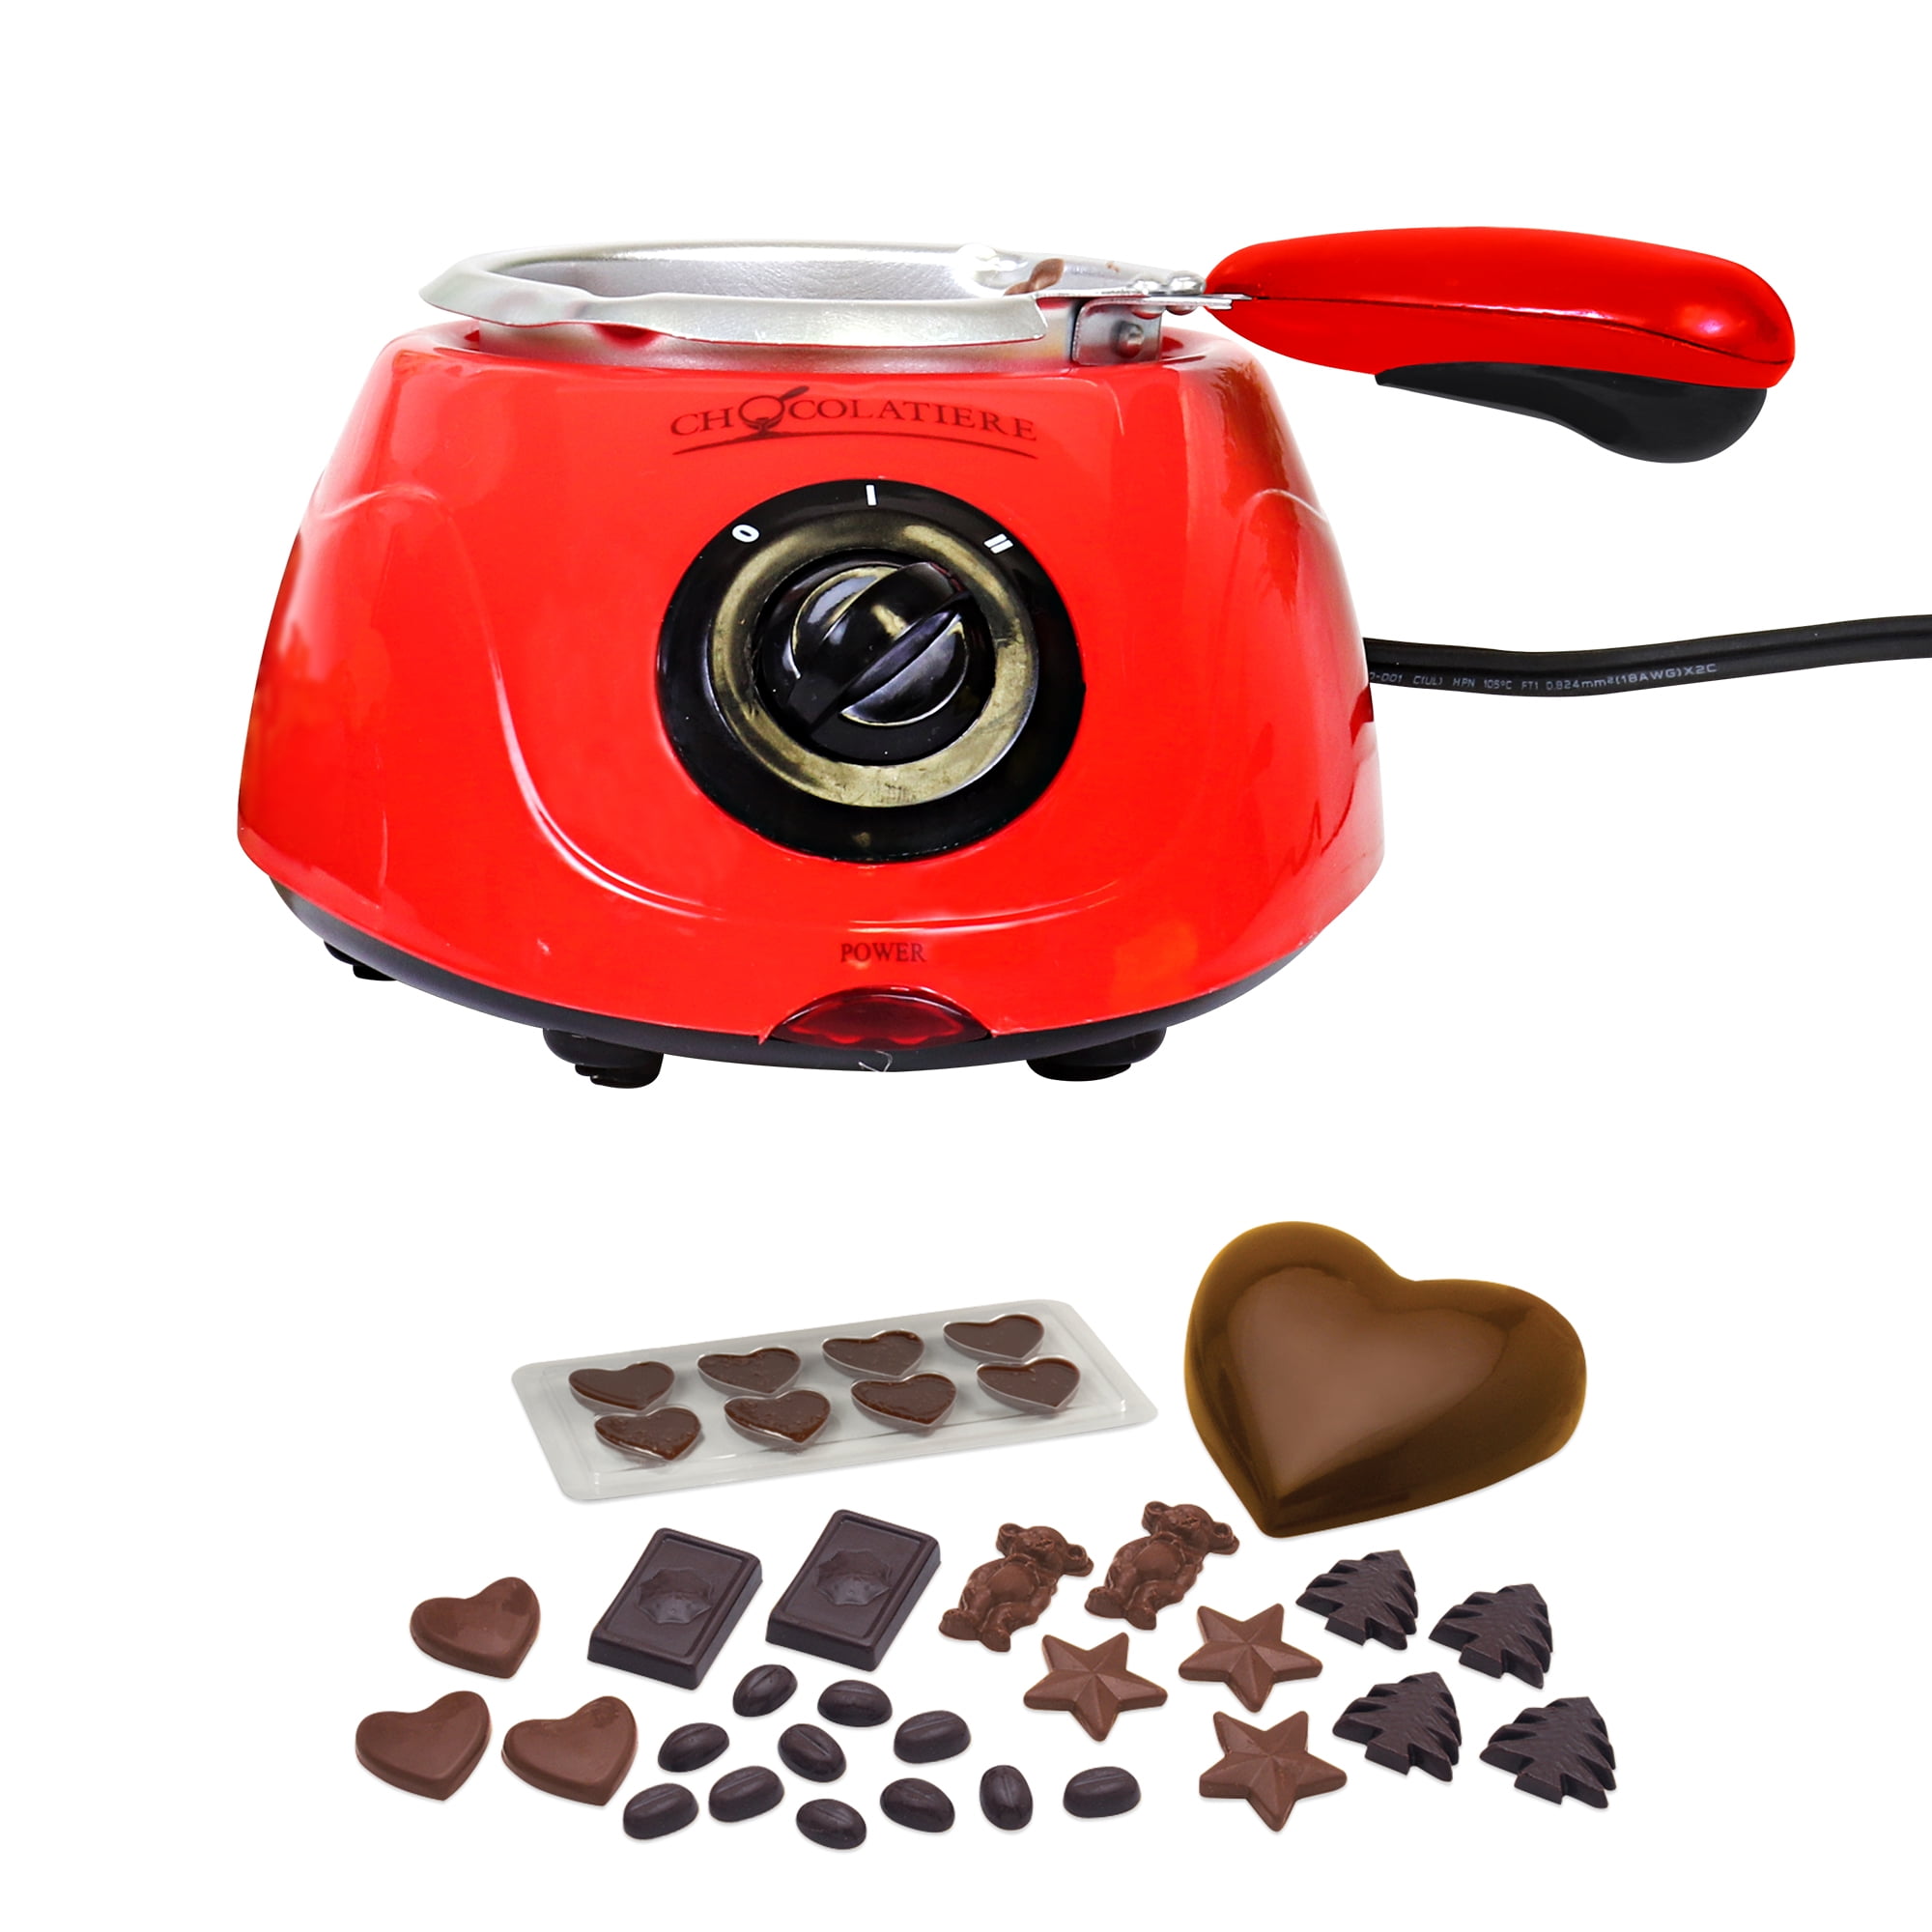 with 32-Piece Accessory Kit for Dessert Special Occasion 250 gm Capacity Total Chef Red Chocolatiere Electric Chocolate Fondue/Melting Pot and Candy Making Kit Family Dinner 